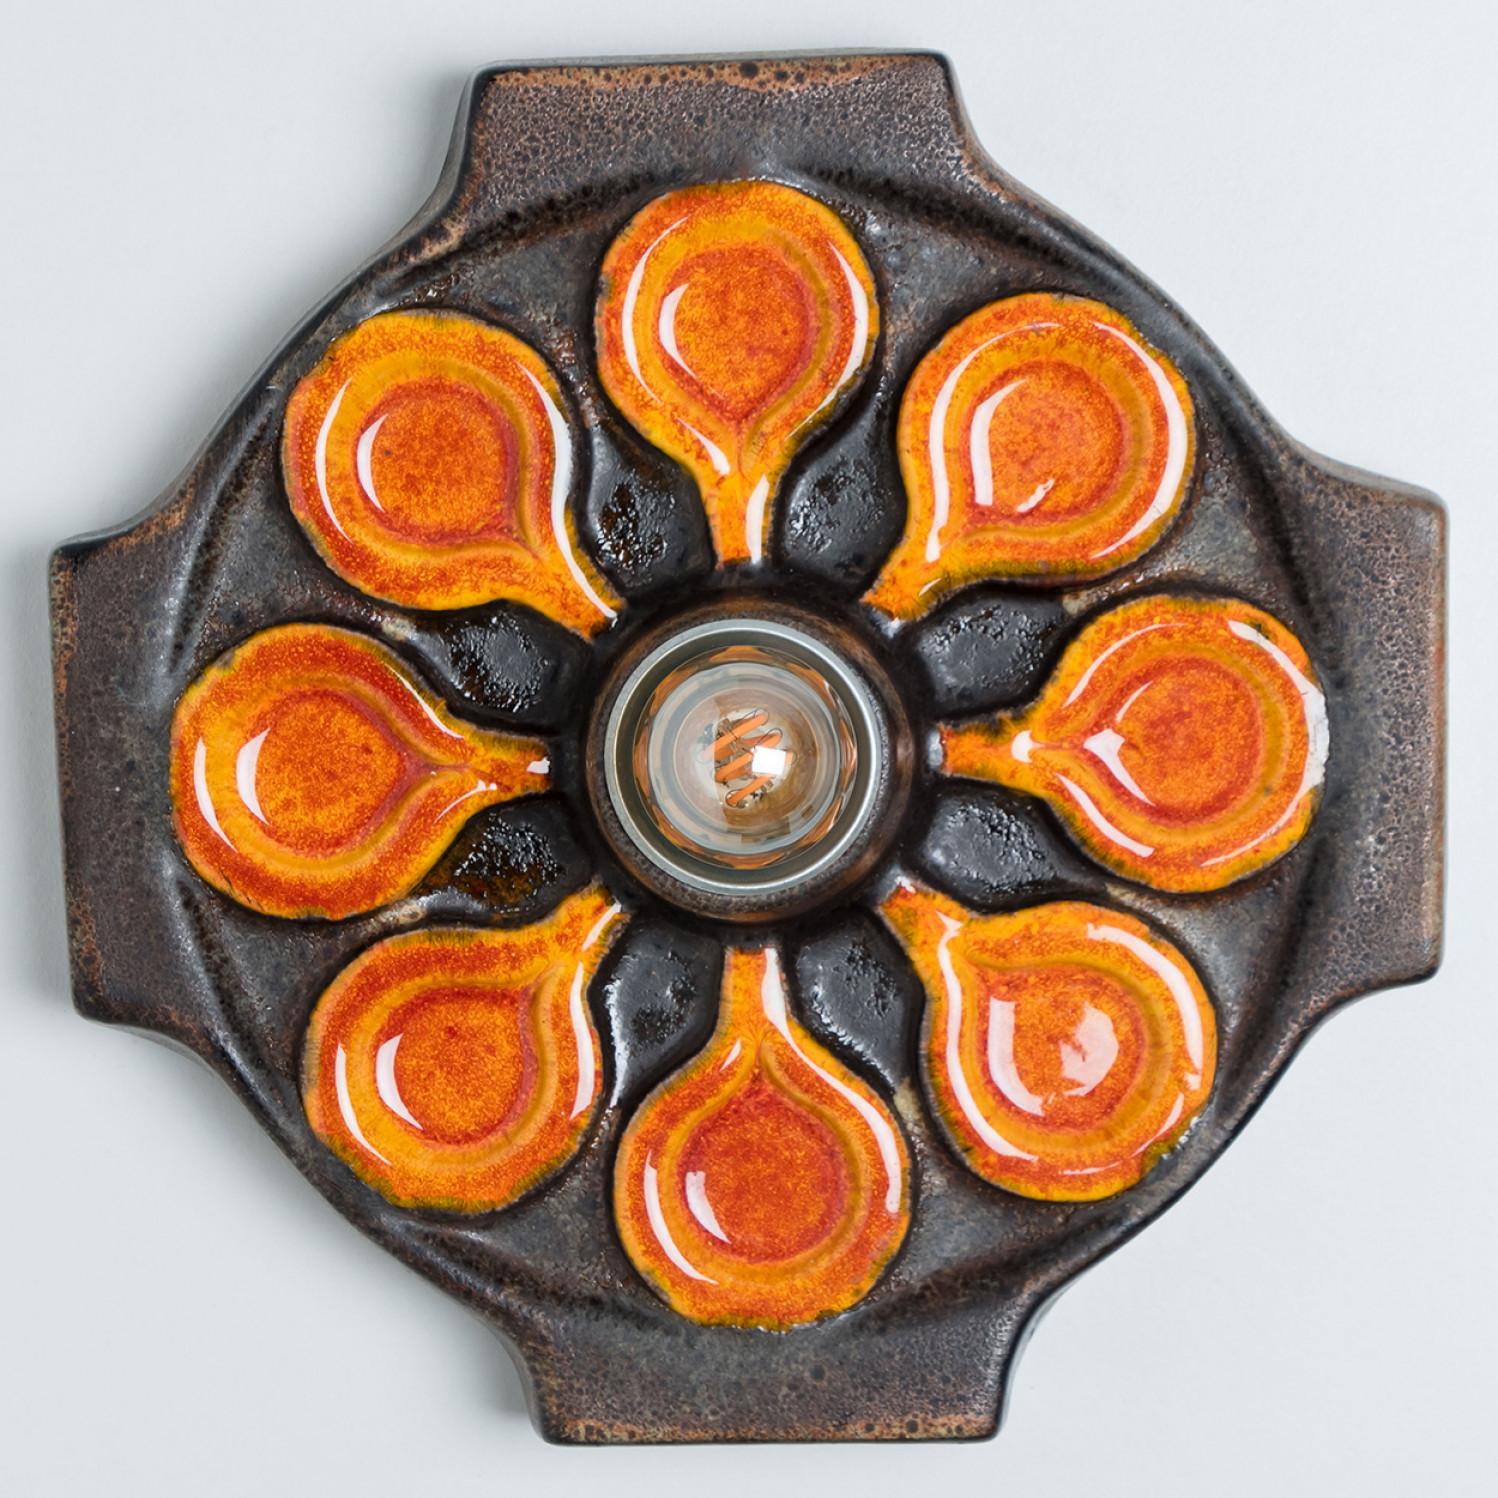 Stunning wall lamp with an unusual shape, made with rich brown and orange colored ceramics, manufactured in the 1970s in Germany. We also have a multitude of unique colored ceramic light sets and arrangements, all available on the frontstore.